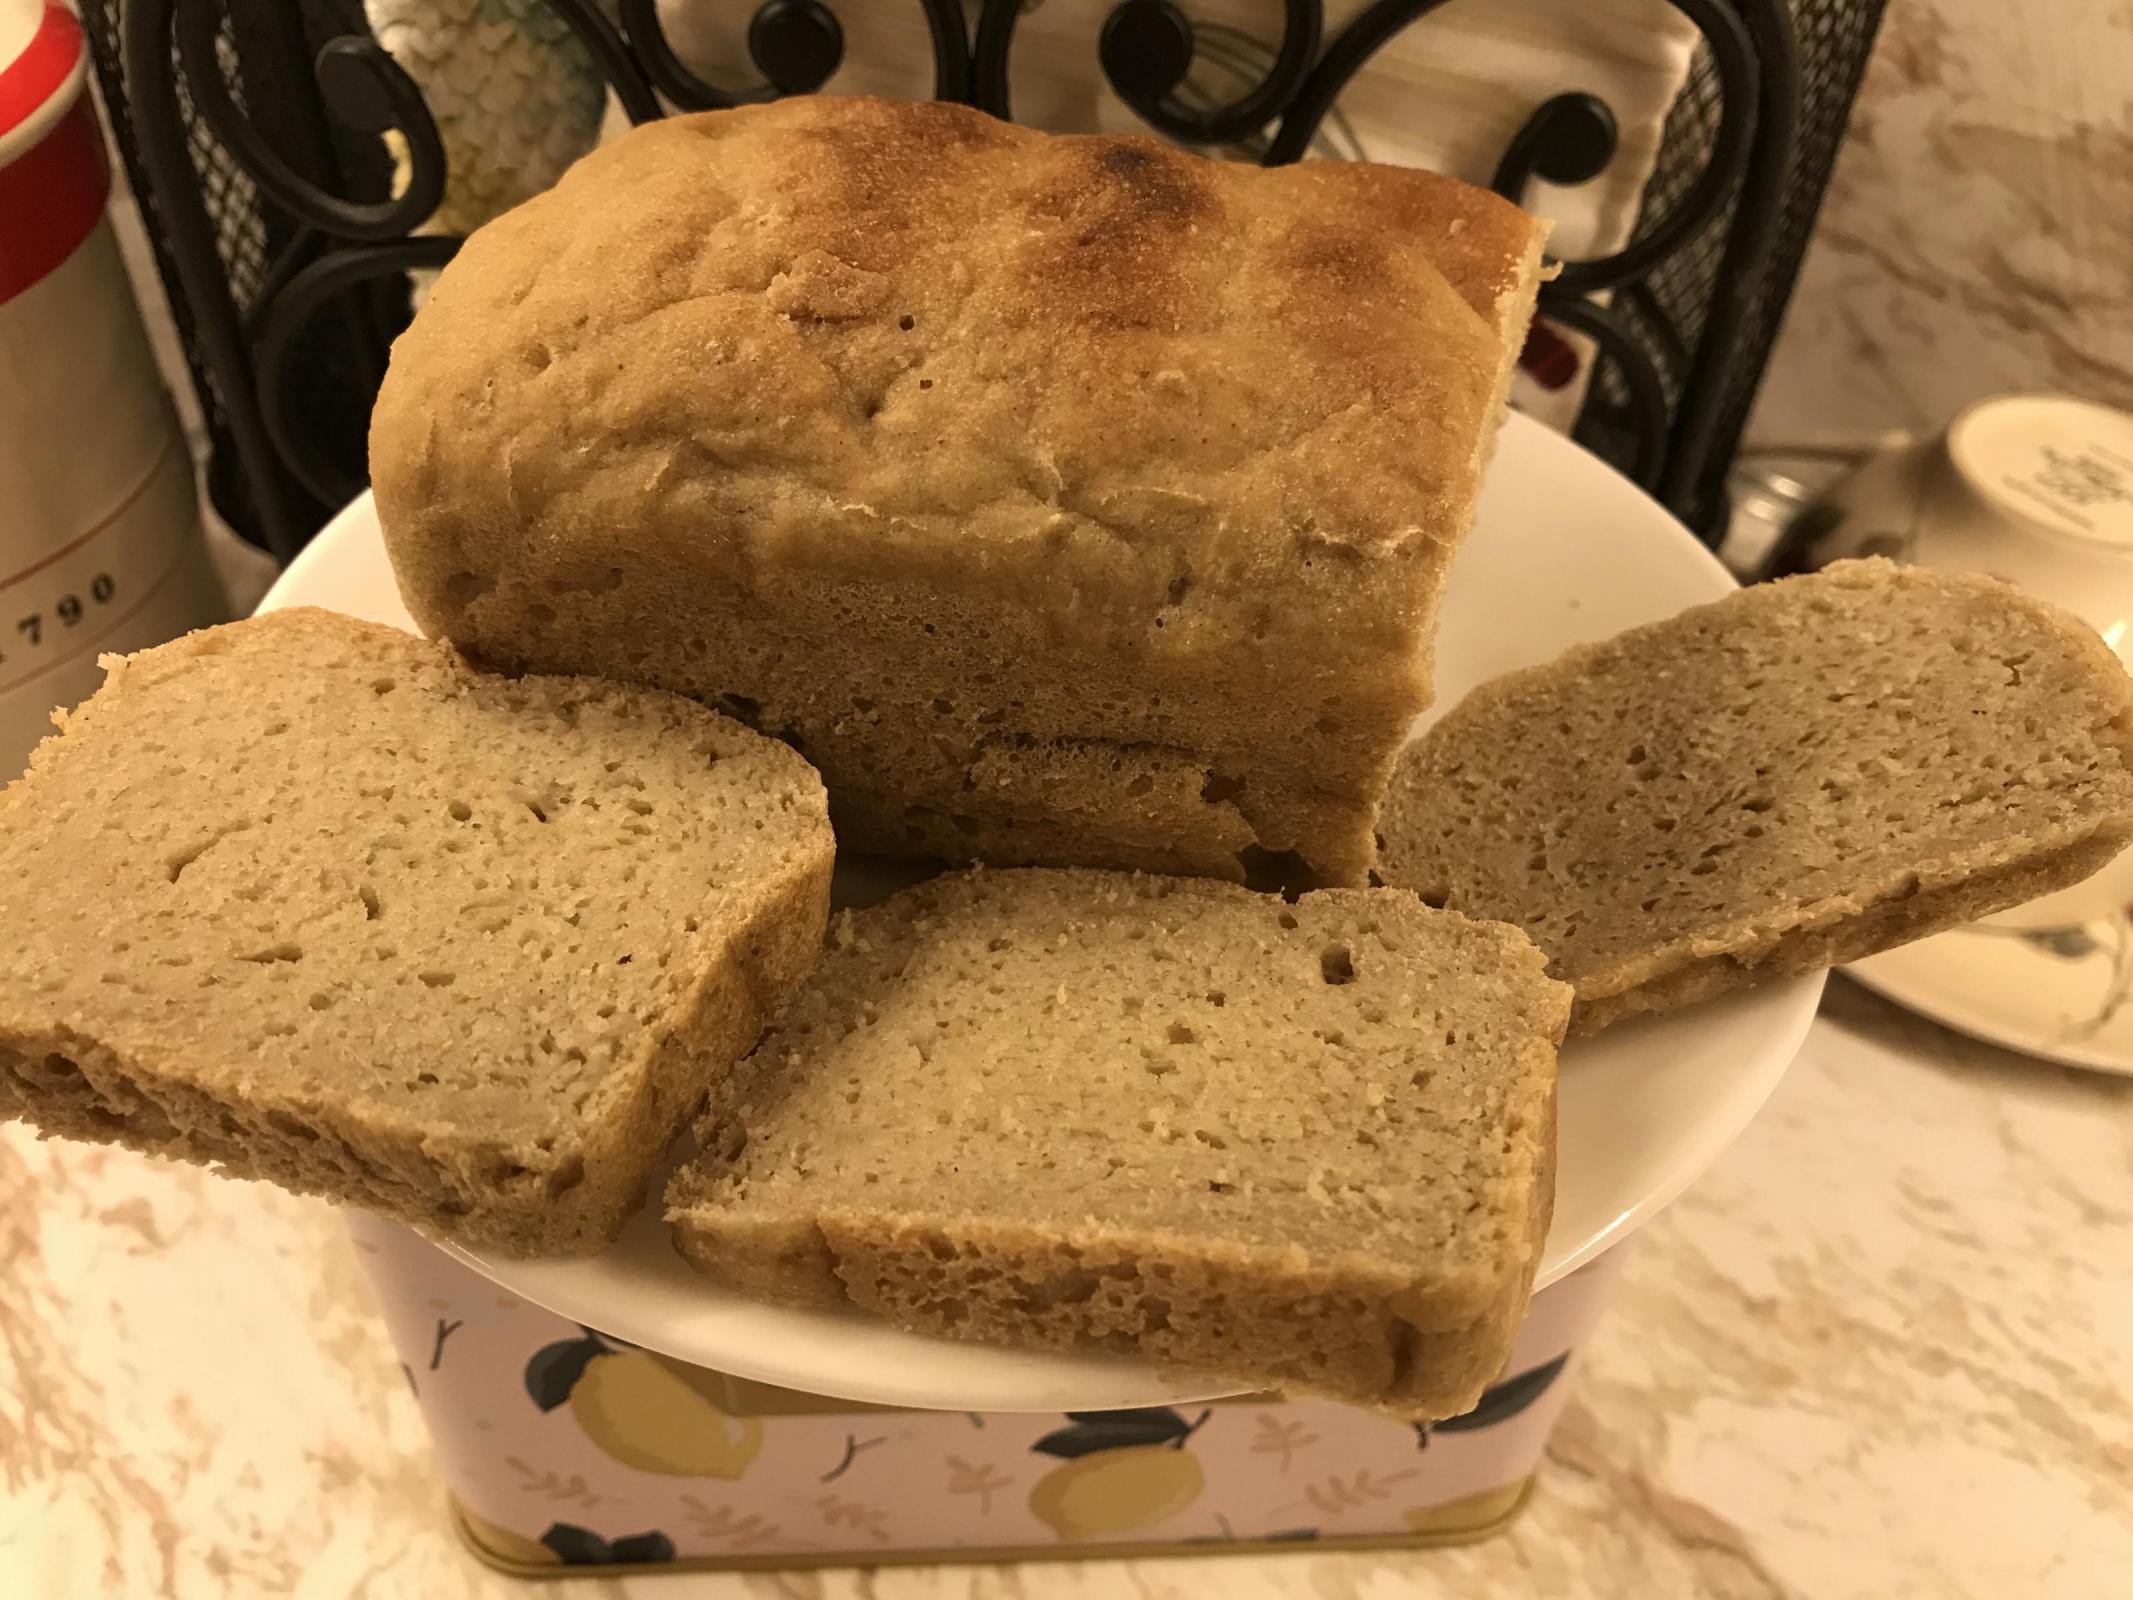 Bread loaf with three slices on plate.